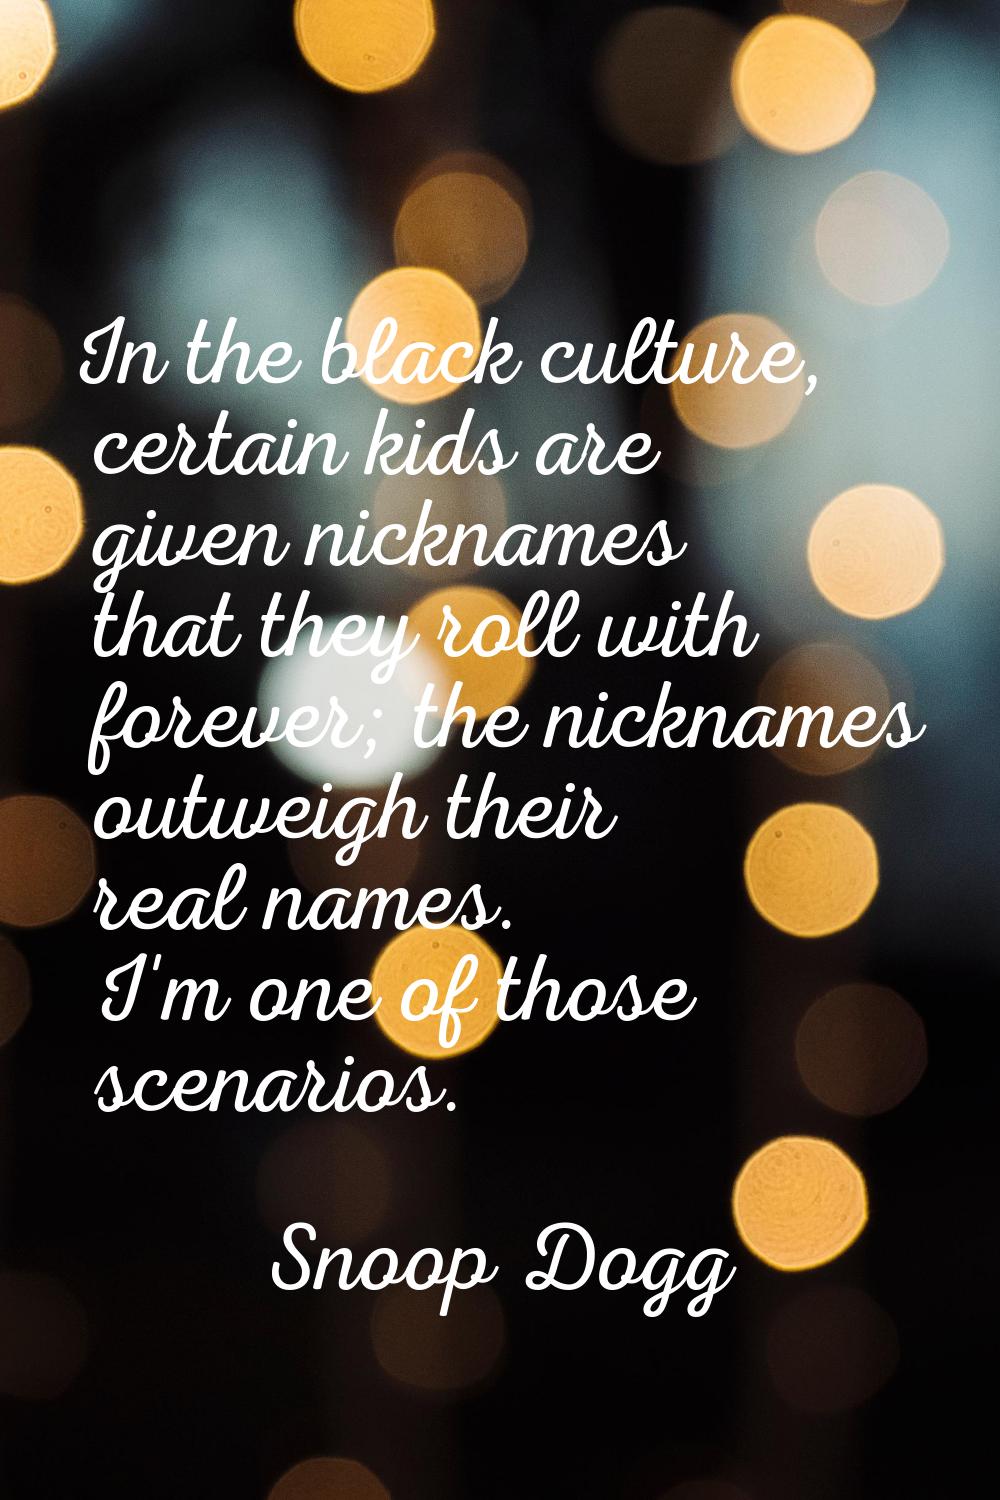 In the black culture, certain kids are given nicknames that they roll with forever; the nicknames o